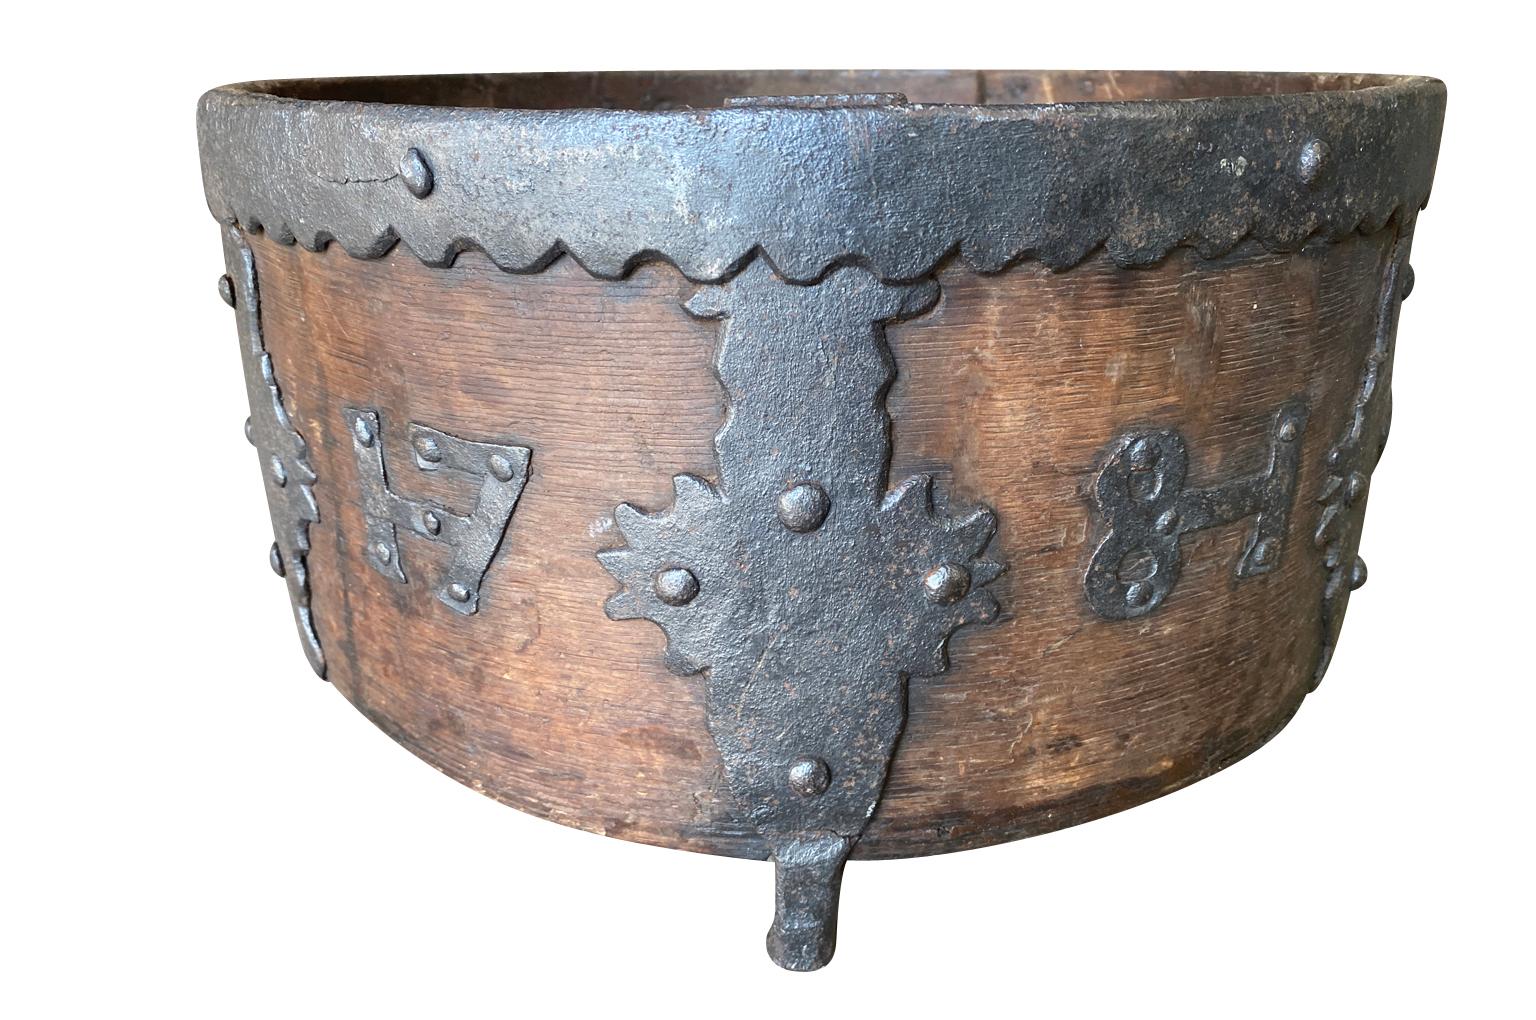 A stunning 18th century Grain Measure from Germany in wood and outstanding iron detailing dated 1781.  This grain measure was originally used to serve horses grain.  Fabulous patina. 